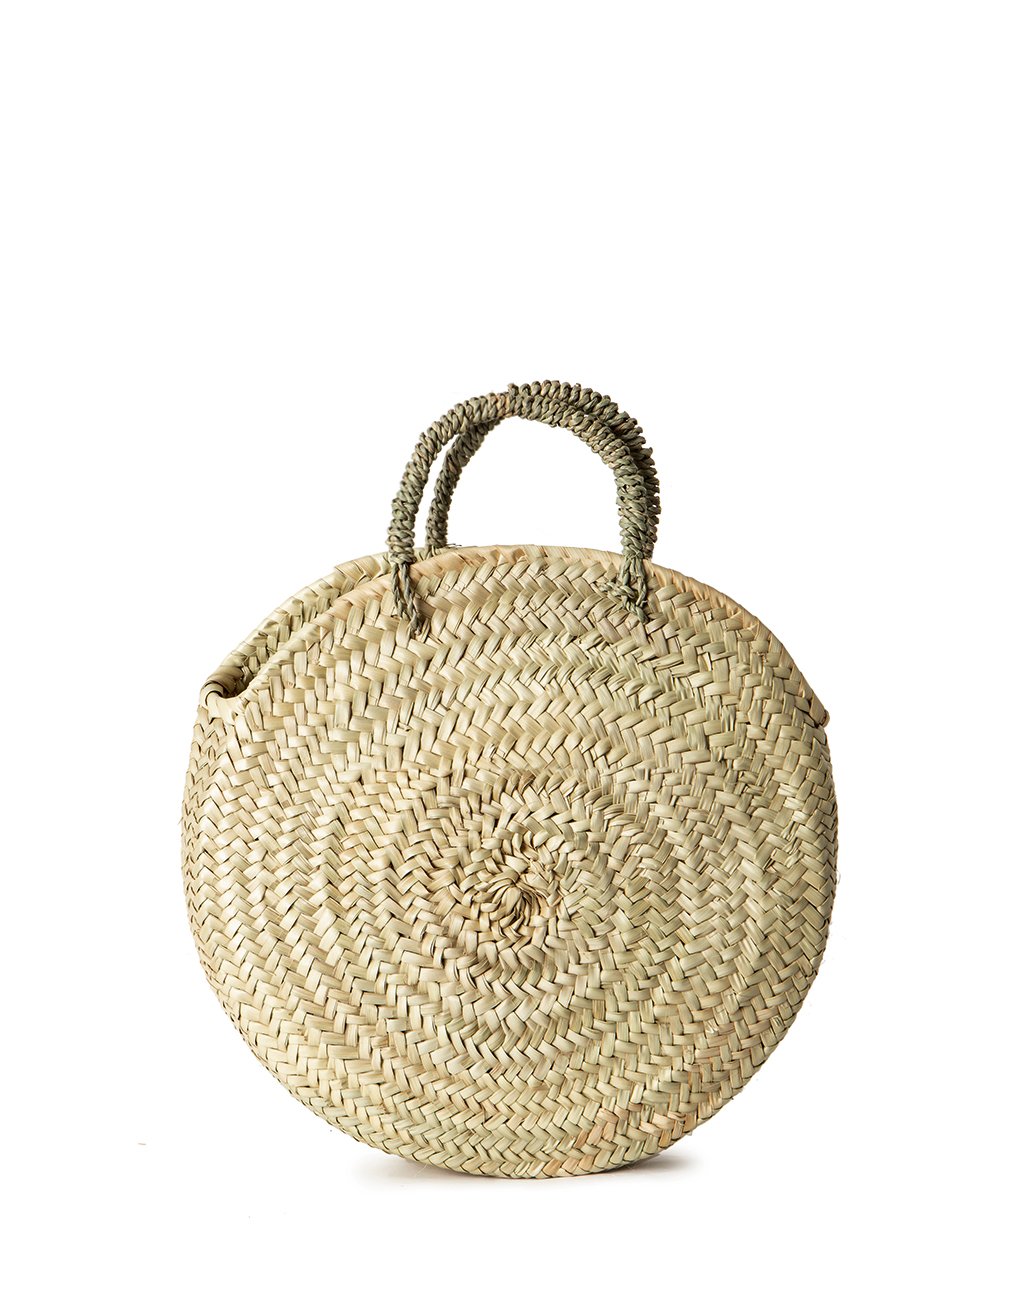 NATURAL PALM ROUND BAG - Souk and Soul